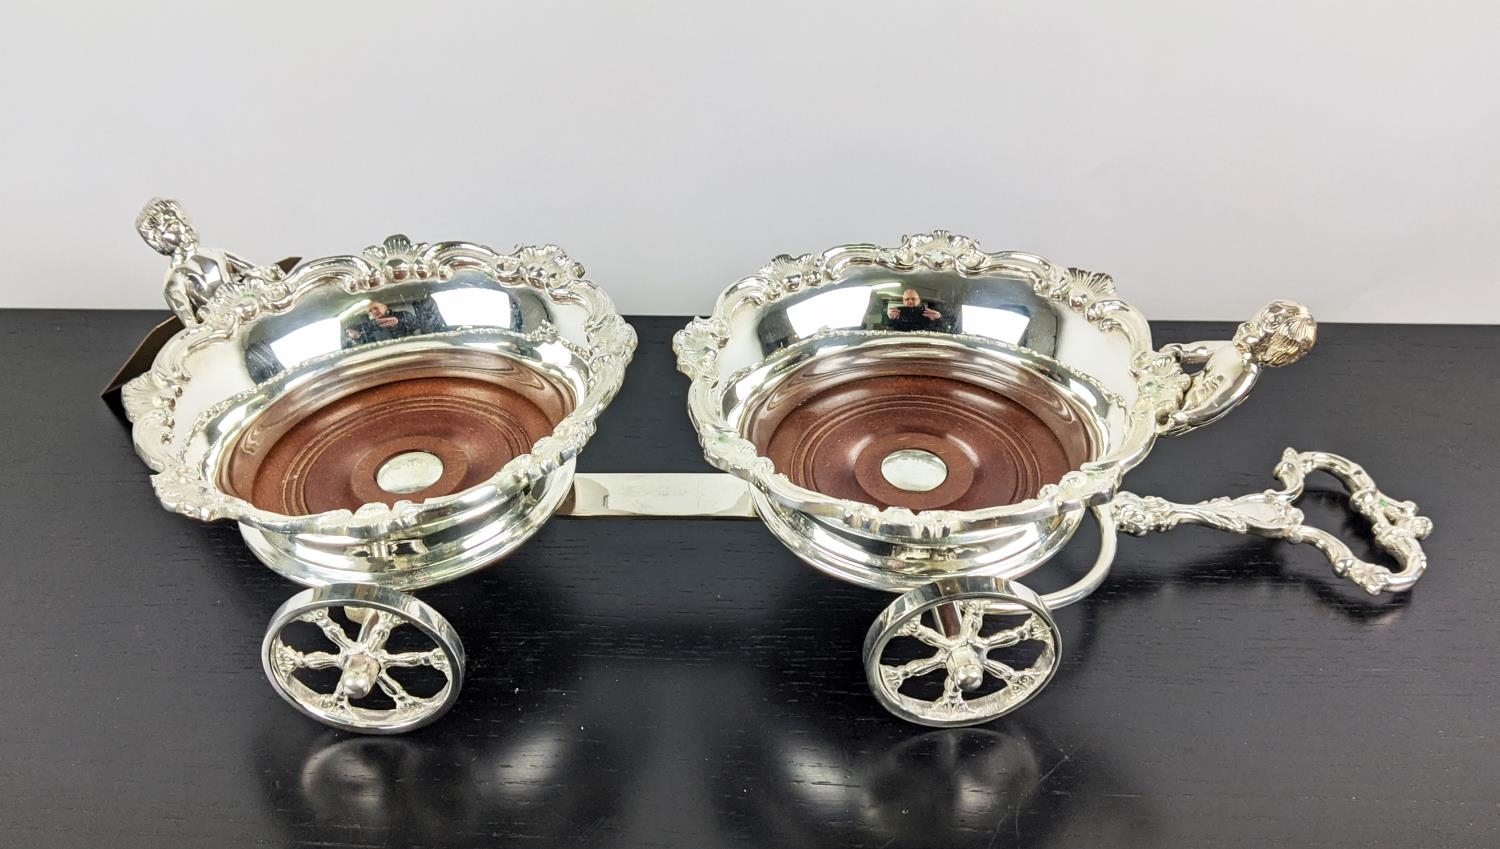 BOTTLE COASTER CART, Victorian style, polished metal, 54cm x 17.5cm x 14.5cm H approx. - Image 2 of 5